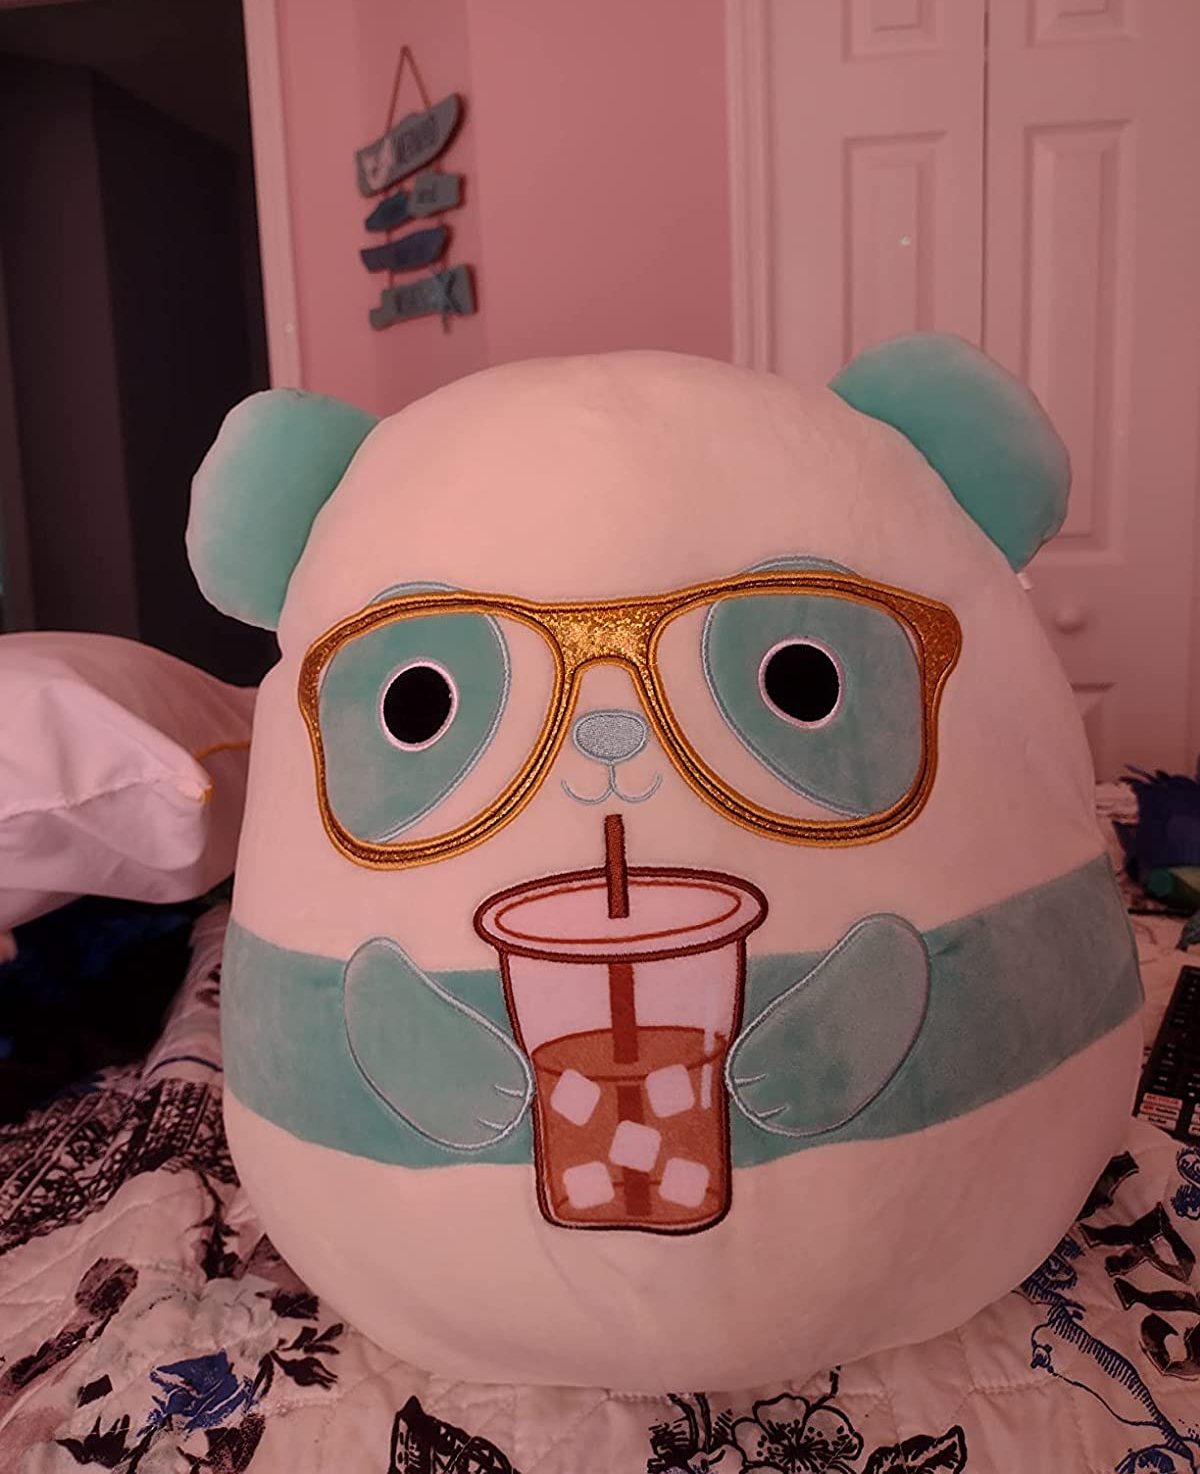 large oval shaped plush mint and white panda wearing gold glasses and holding iced coffee